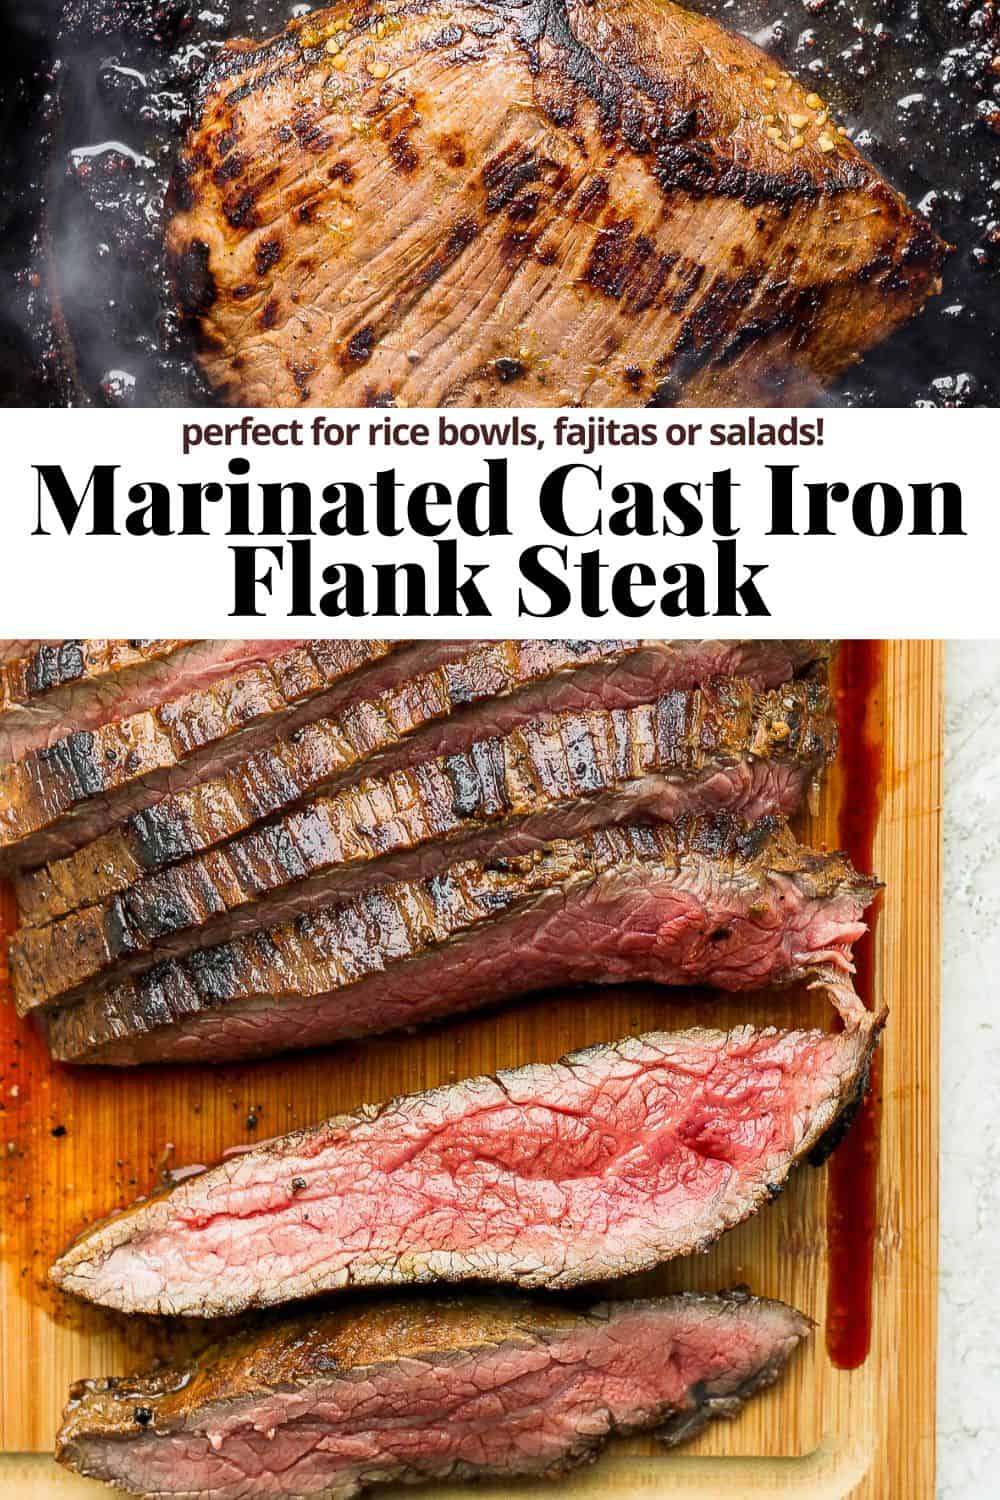 Pinterest image that shows a flank steak cooking in a cast iron skillet, the recipe title, and then fully cooked and sliced flank steak on the bottom.